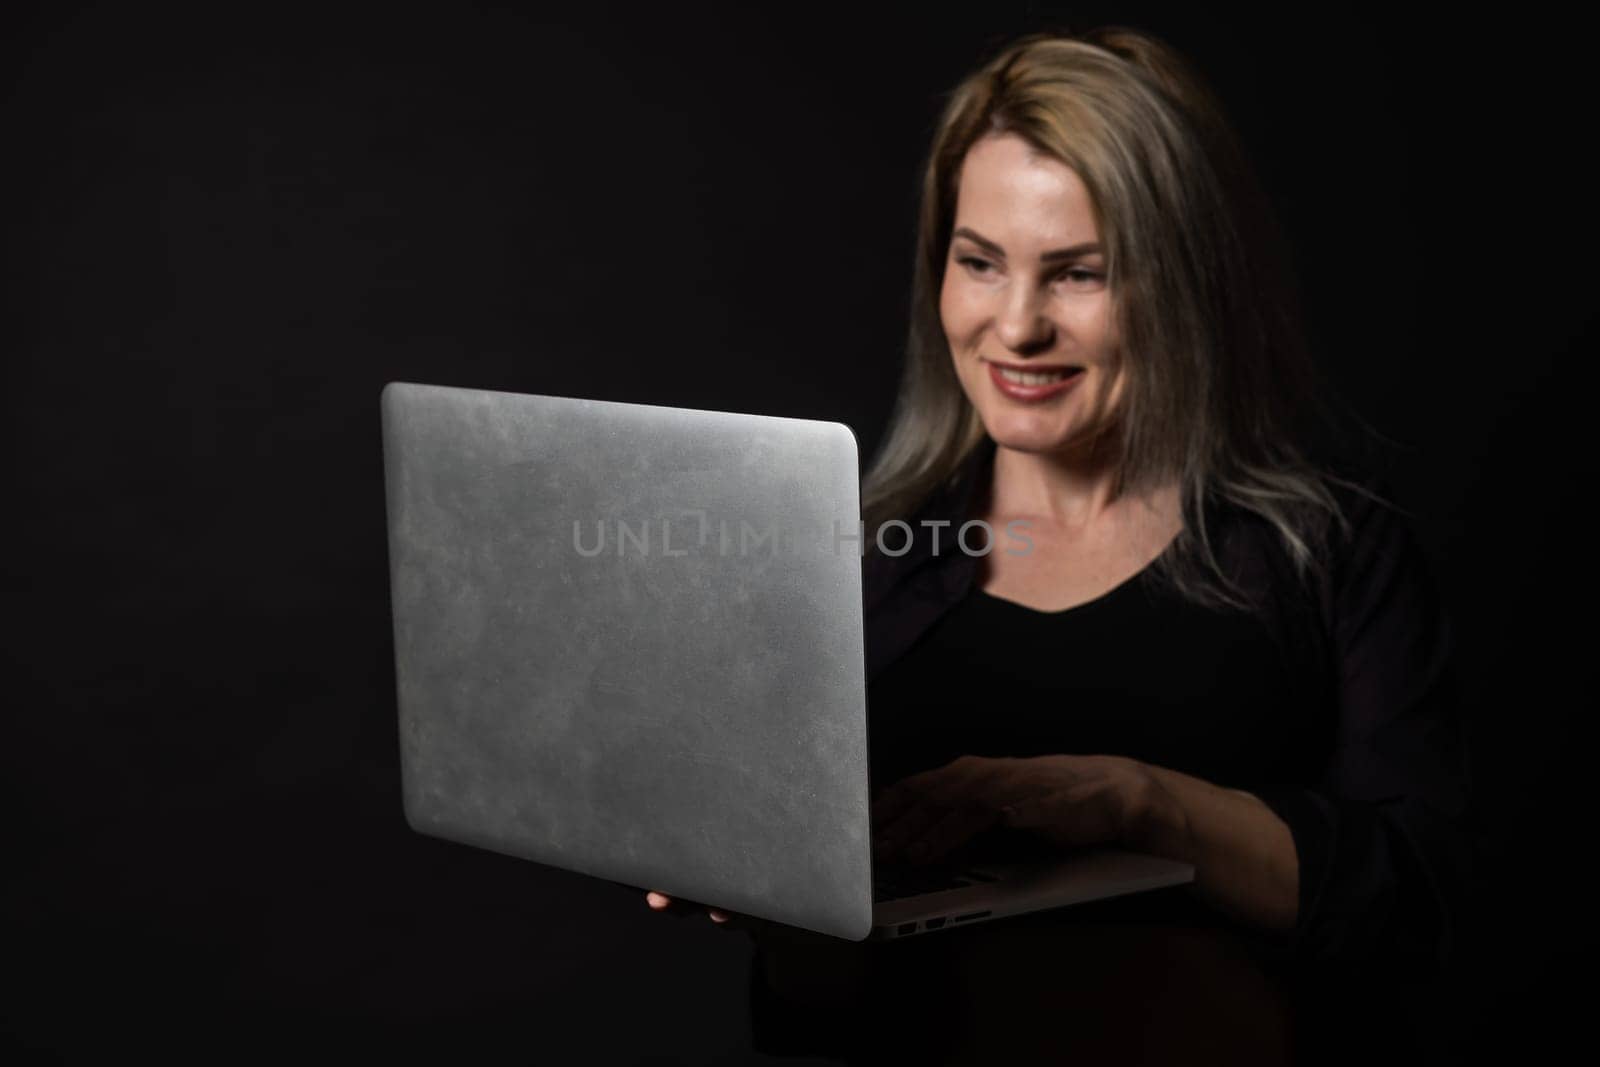 woman with laptop on black background by Andelov13